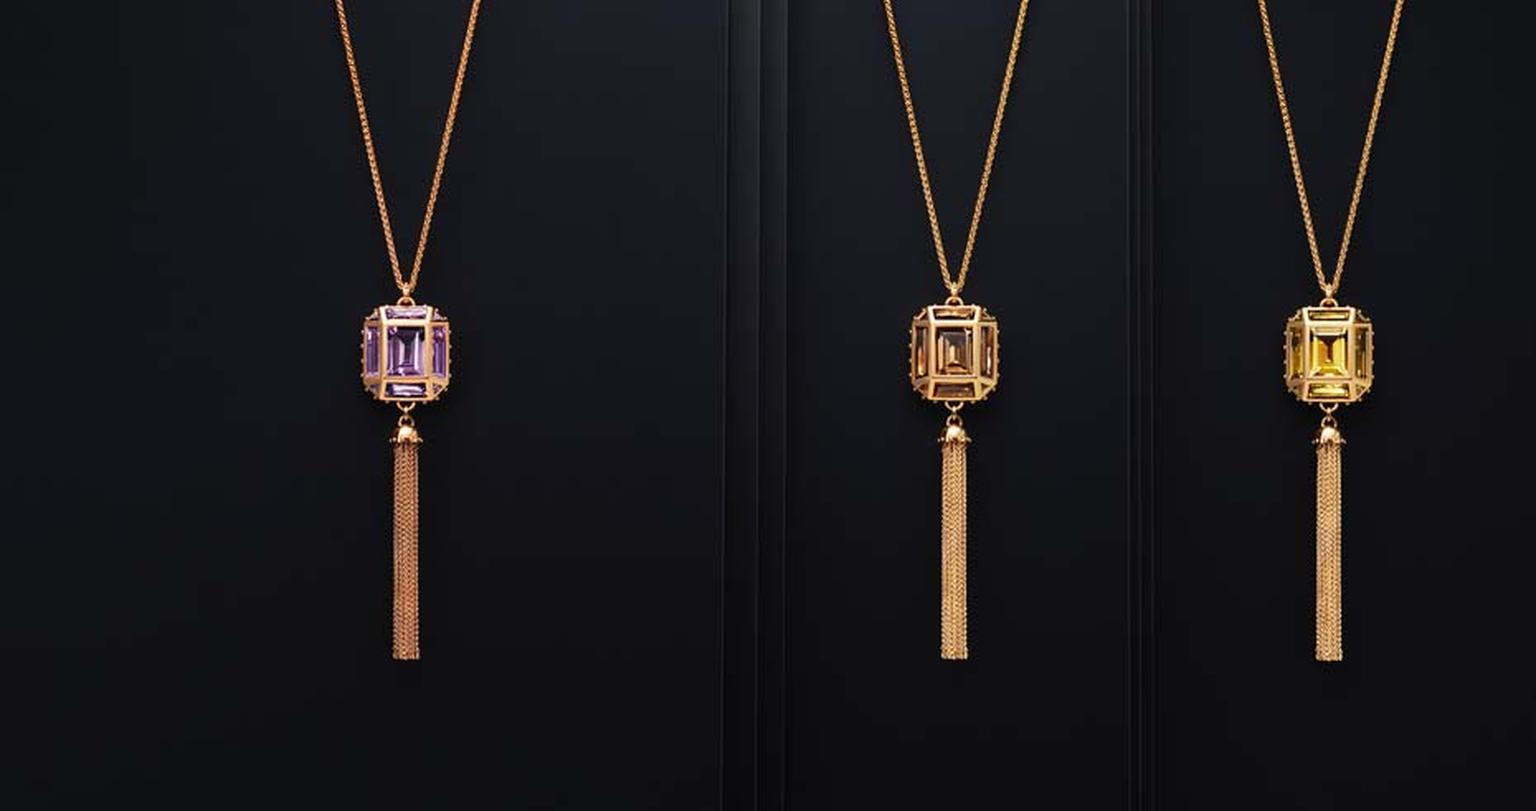 Louis Vuitton's new jewelry collection